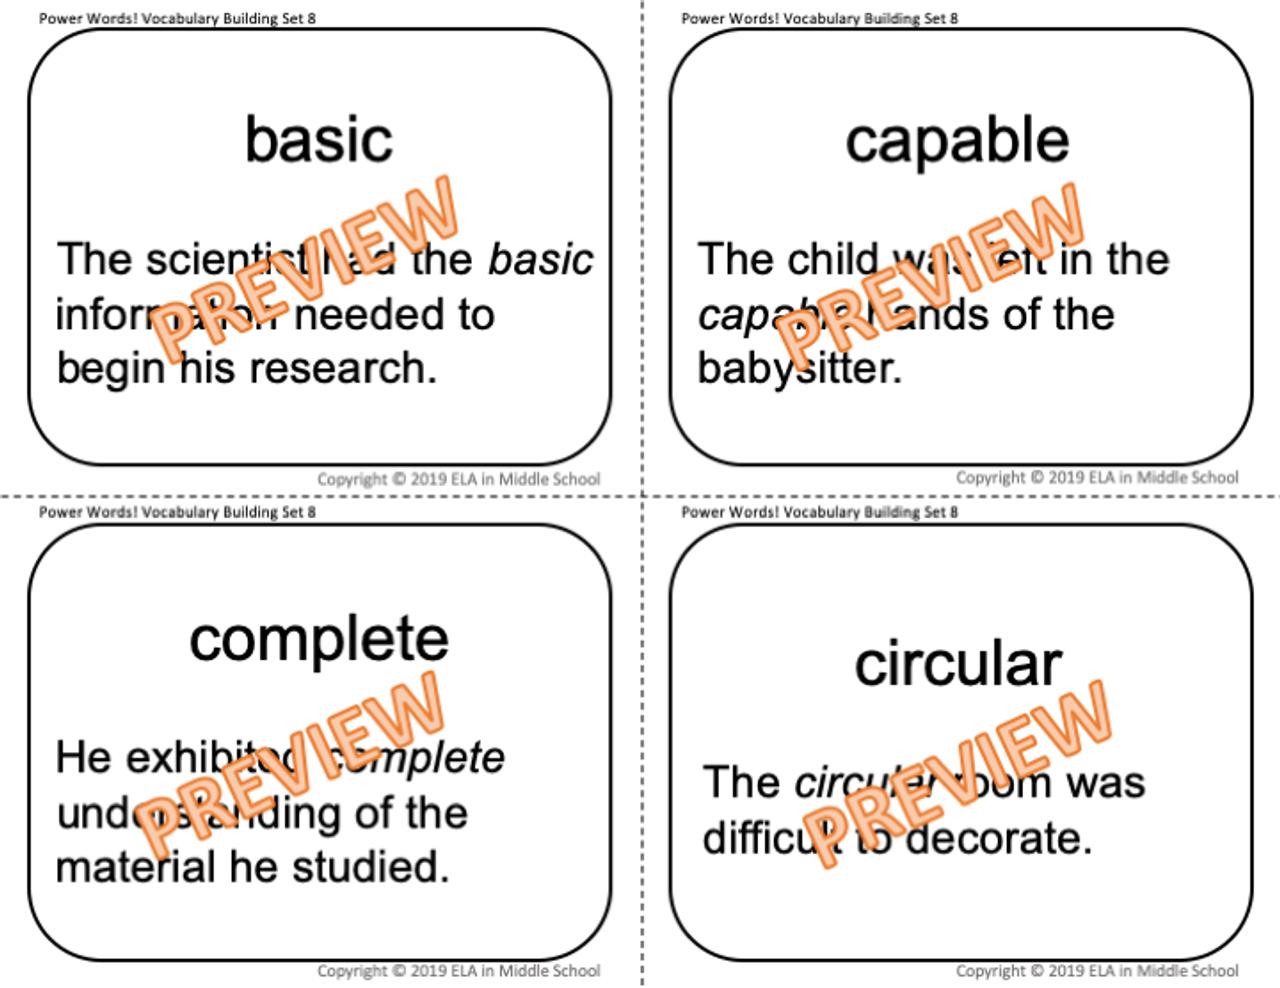 Power Words! Vocabulary Building Flashcards and Word Wall Set 8